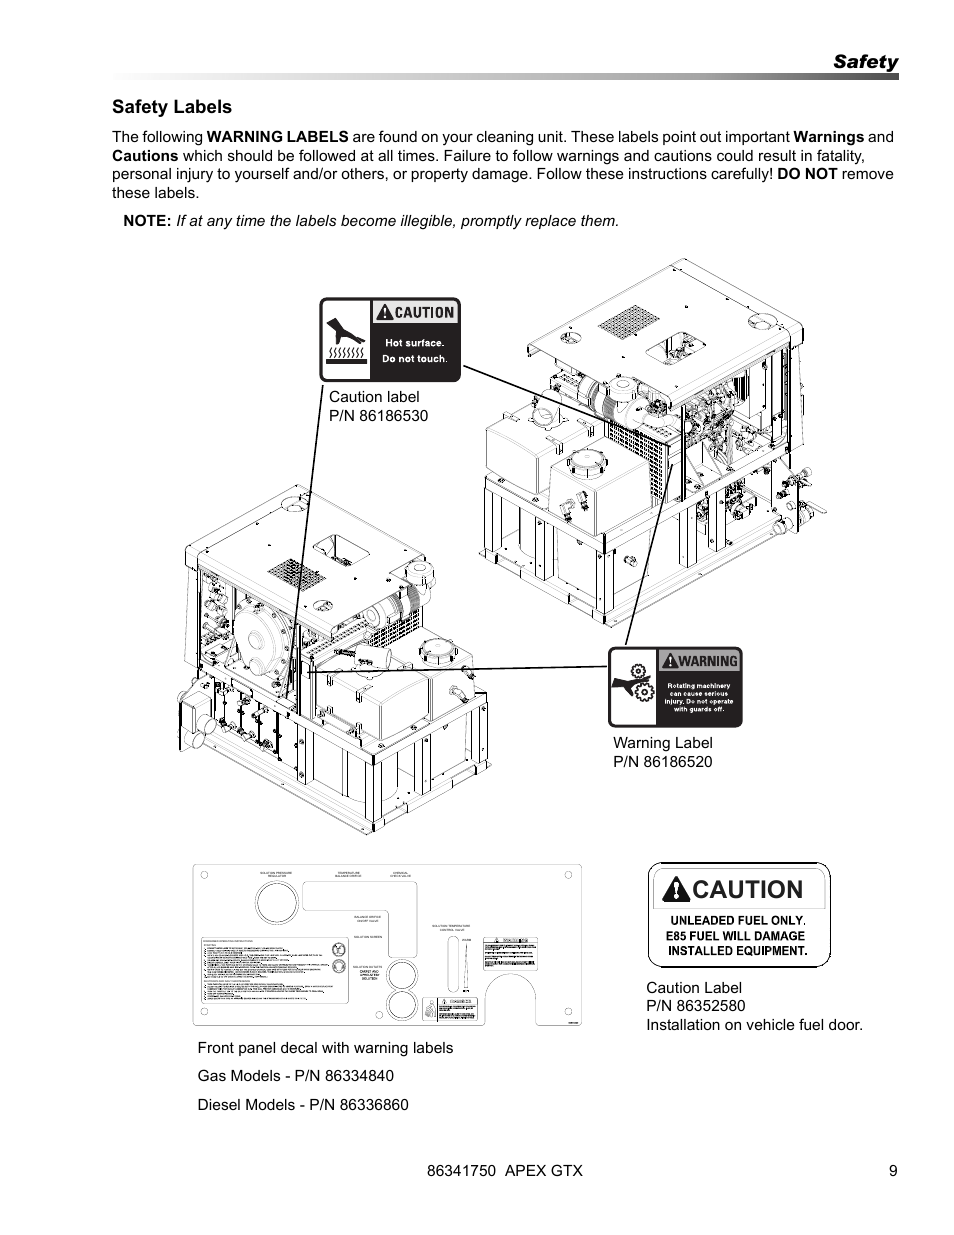 Caution, Safety labels, Safety | Prochem Apex GTX User Manual | Page 11